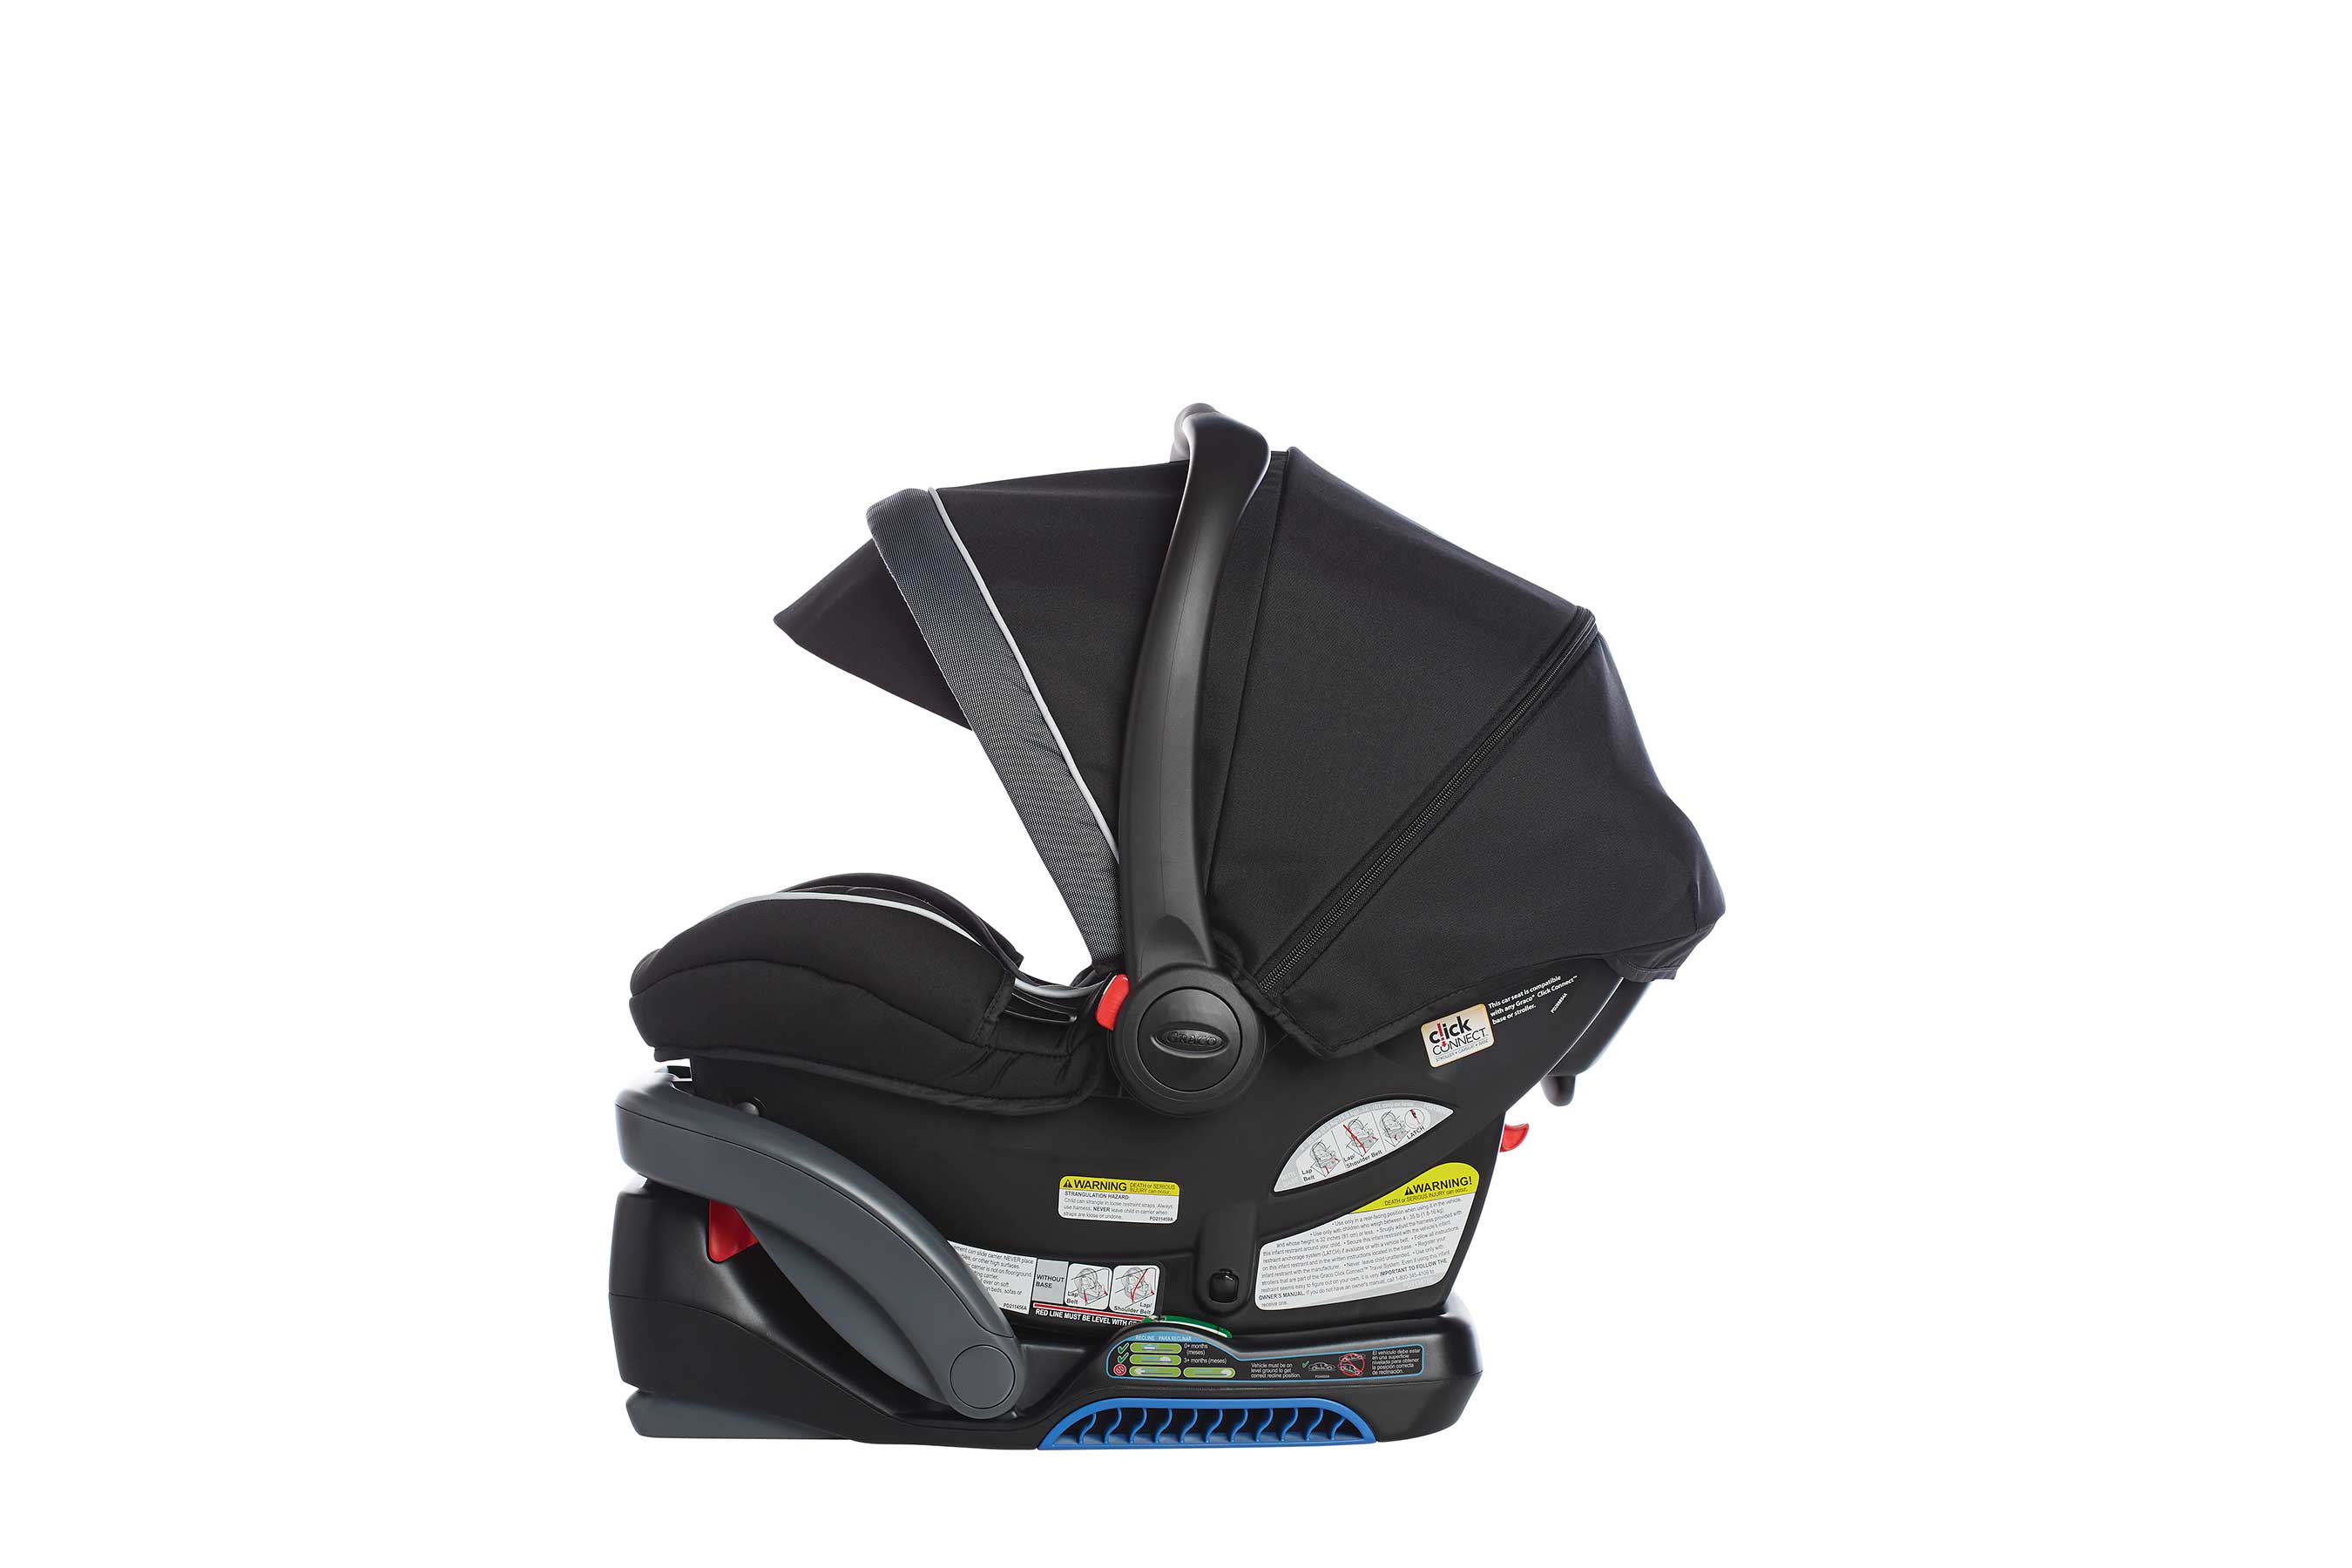 How to remove graco snugride 35 car seat from base Everything Just Clicks With New Graco Snugride Snuglock